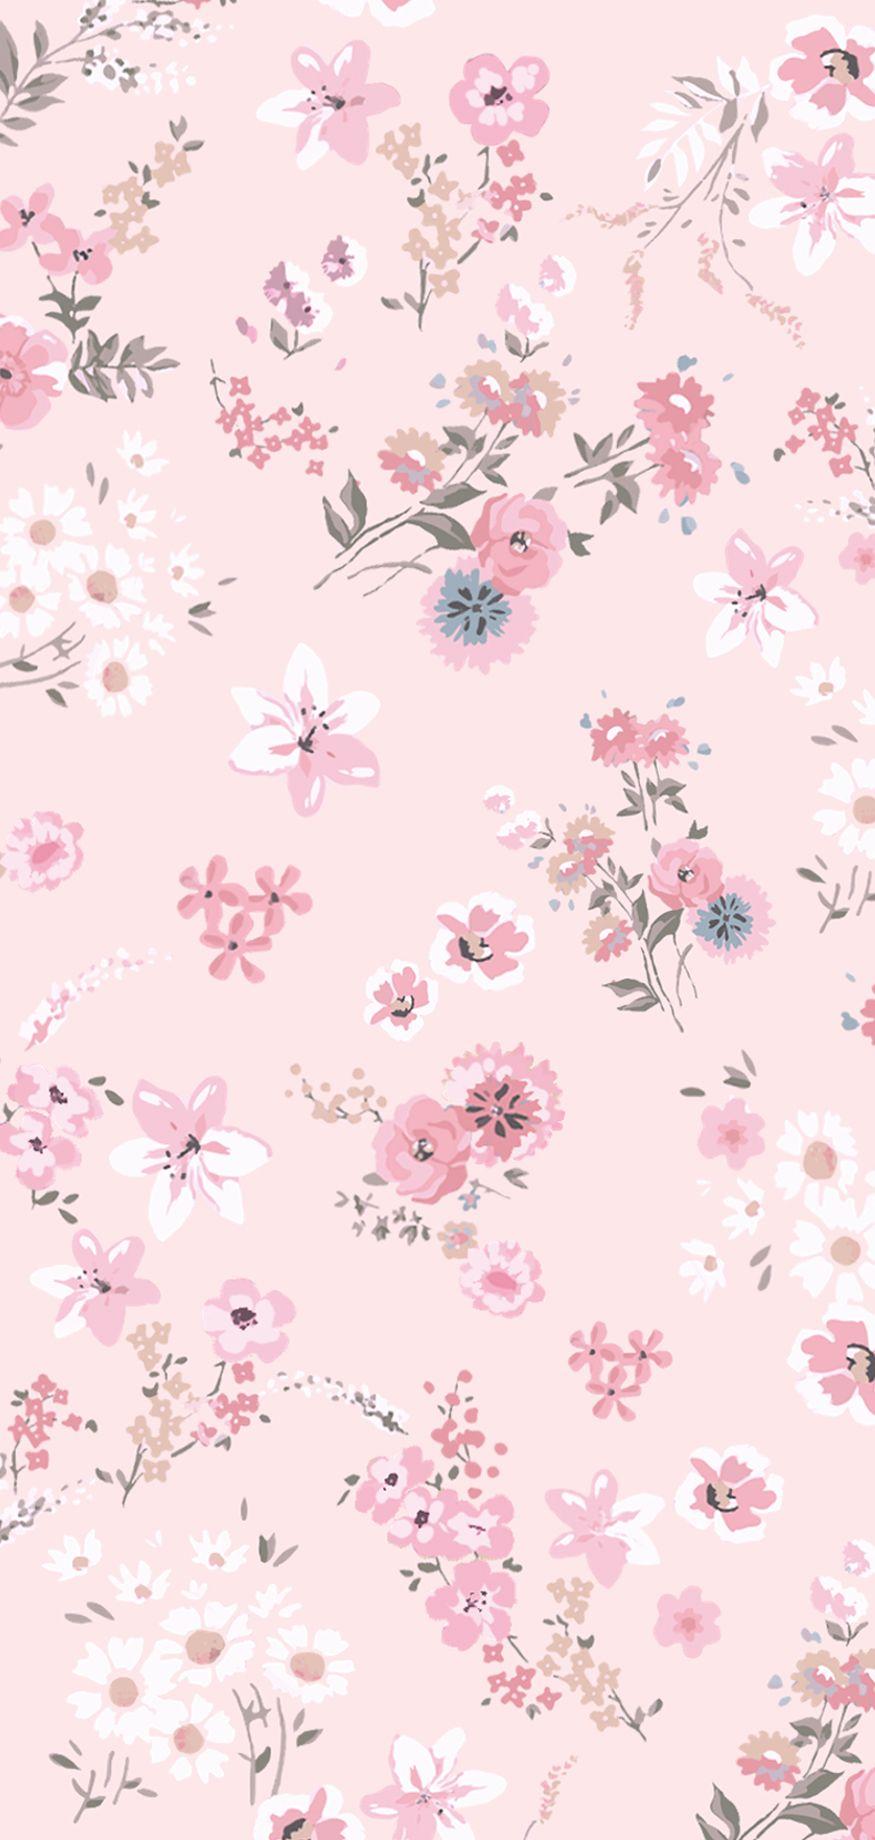 Tiny Flowers. Pastel iphone wallpaper, Floral wallpaper iphone, Pastel color wallpaper